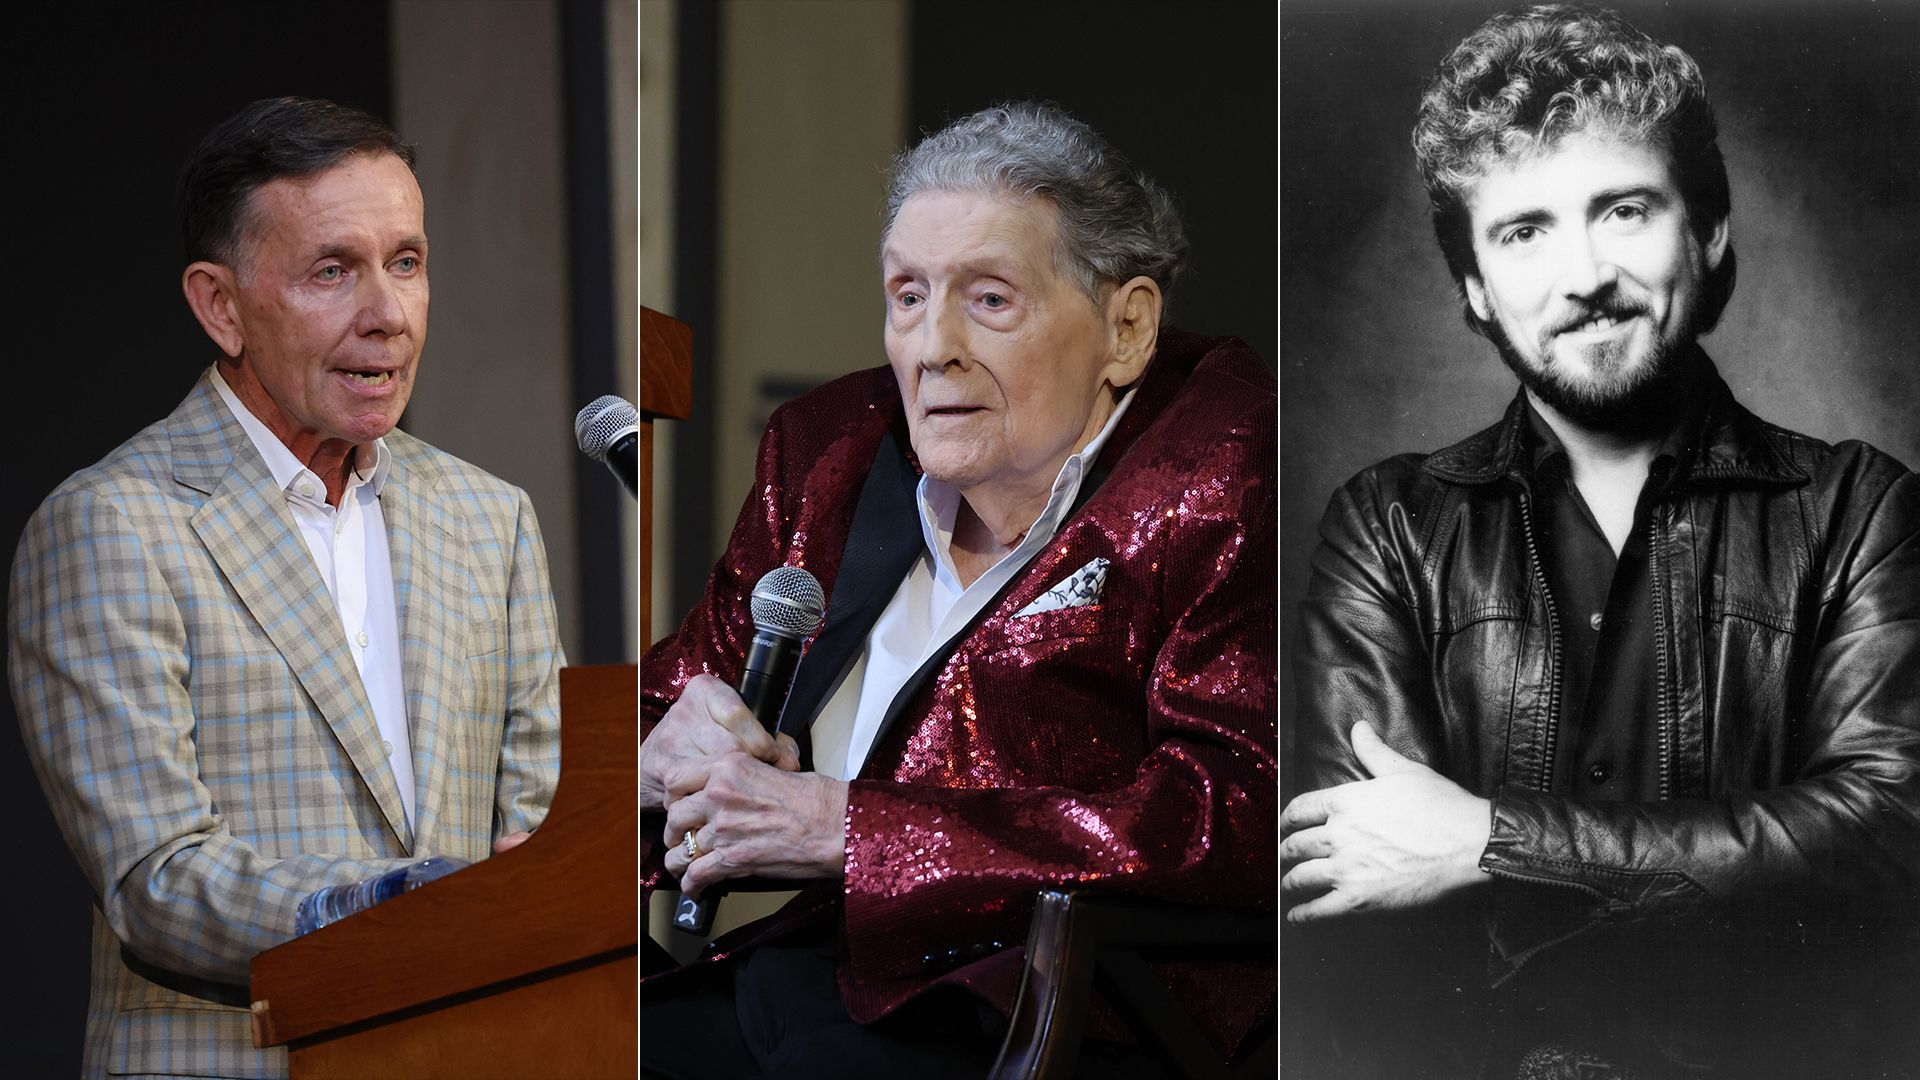 A composite image of executive Joe Galante, Jerry Lee Lewis and Keith Whitley